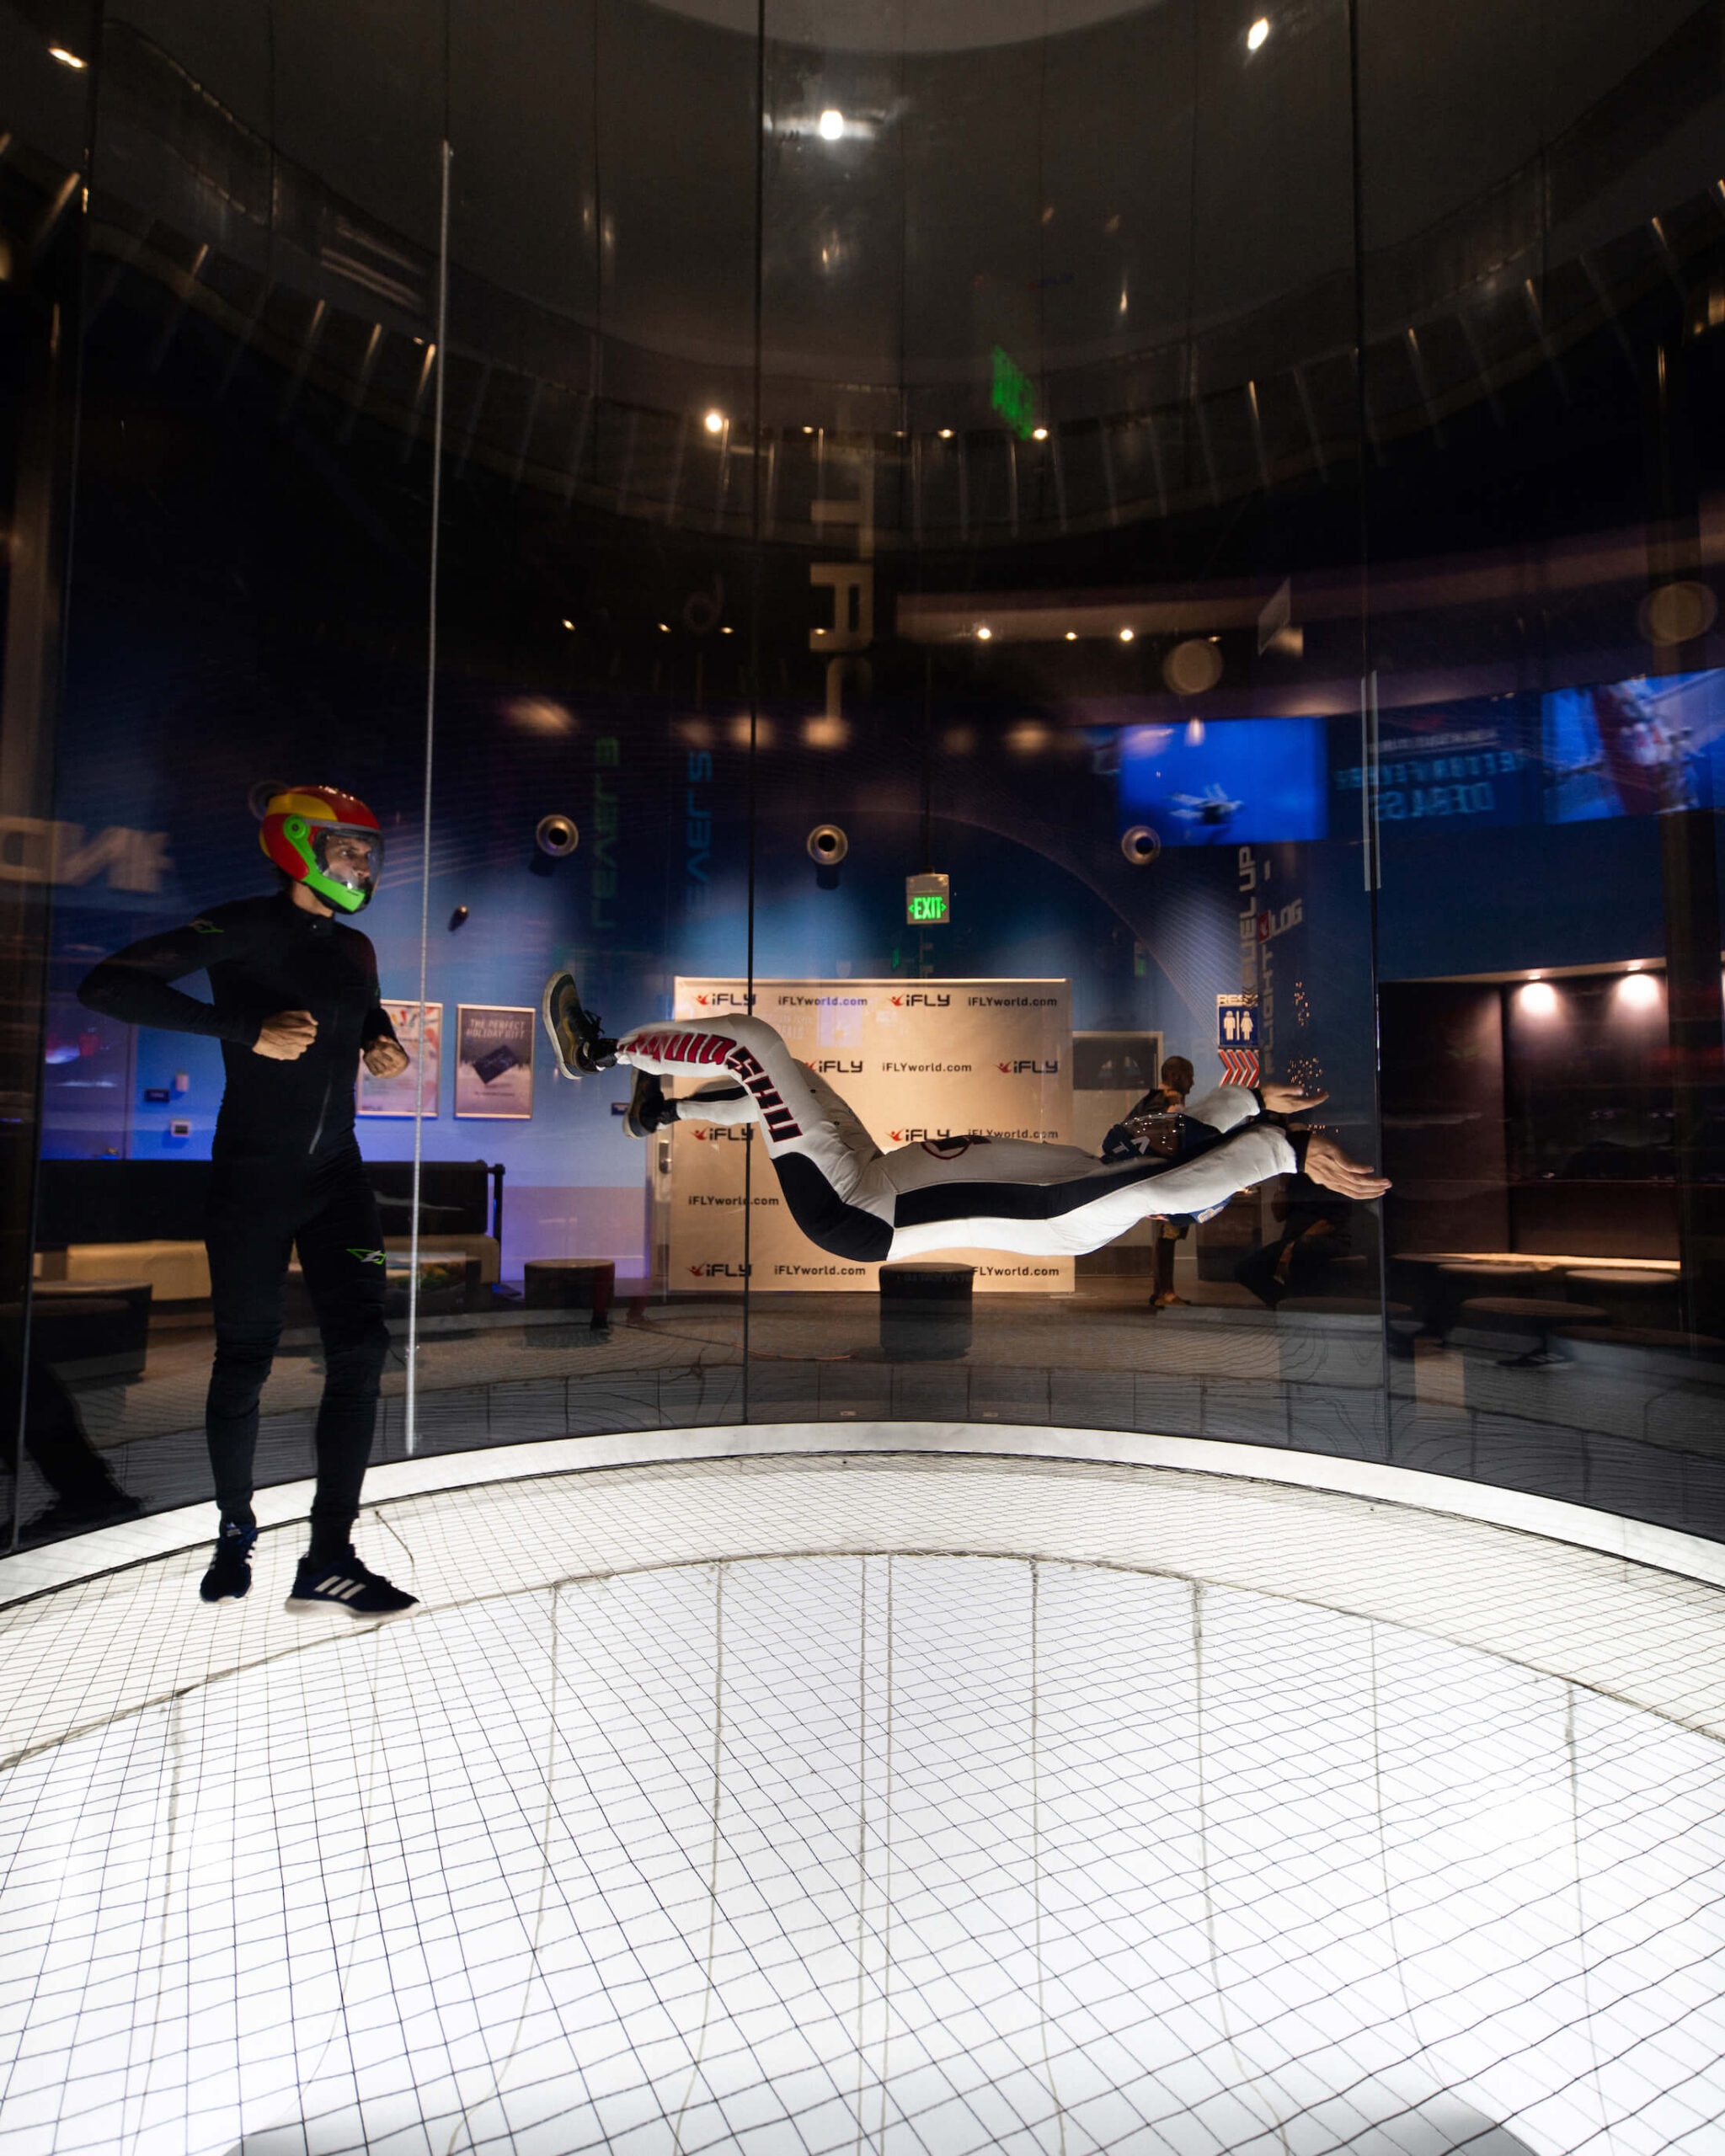 Take Your Team to New Heights with iFly, Calgary's Revolutionary Indoor Skydiving Facility at the Grizzly Classic Men's Artistic Gymnastics Competition.